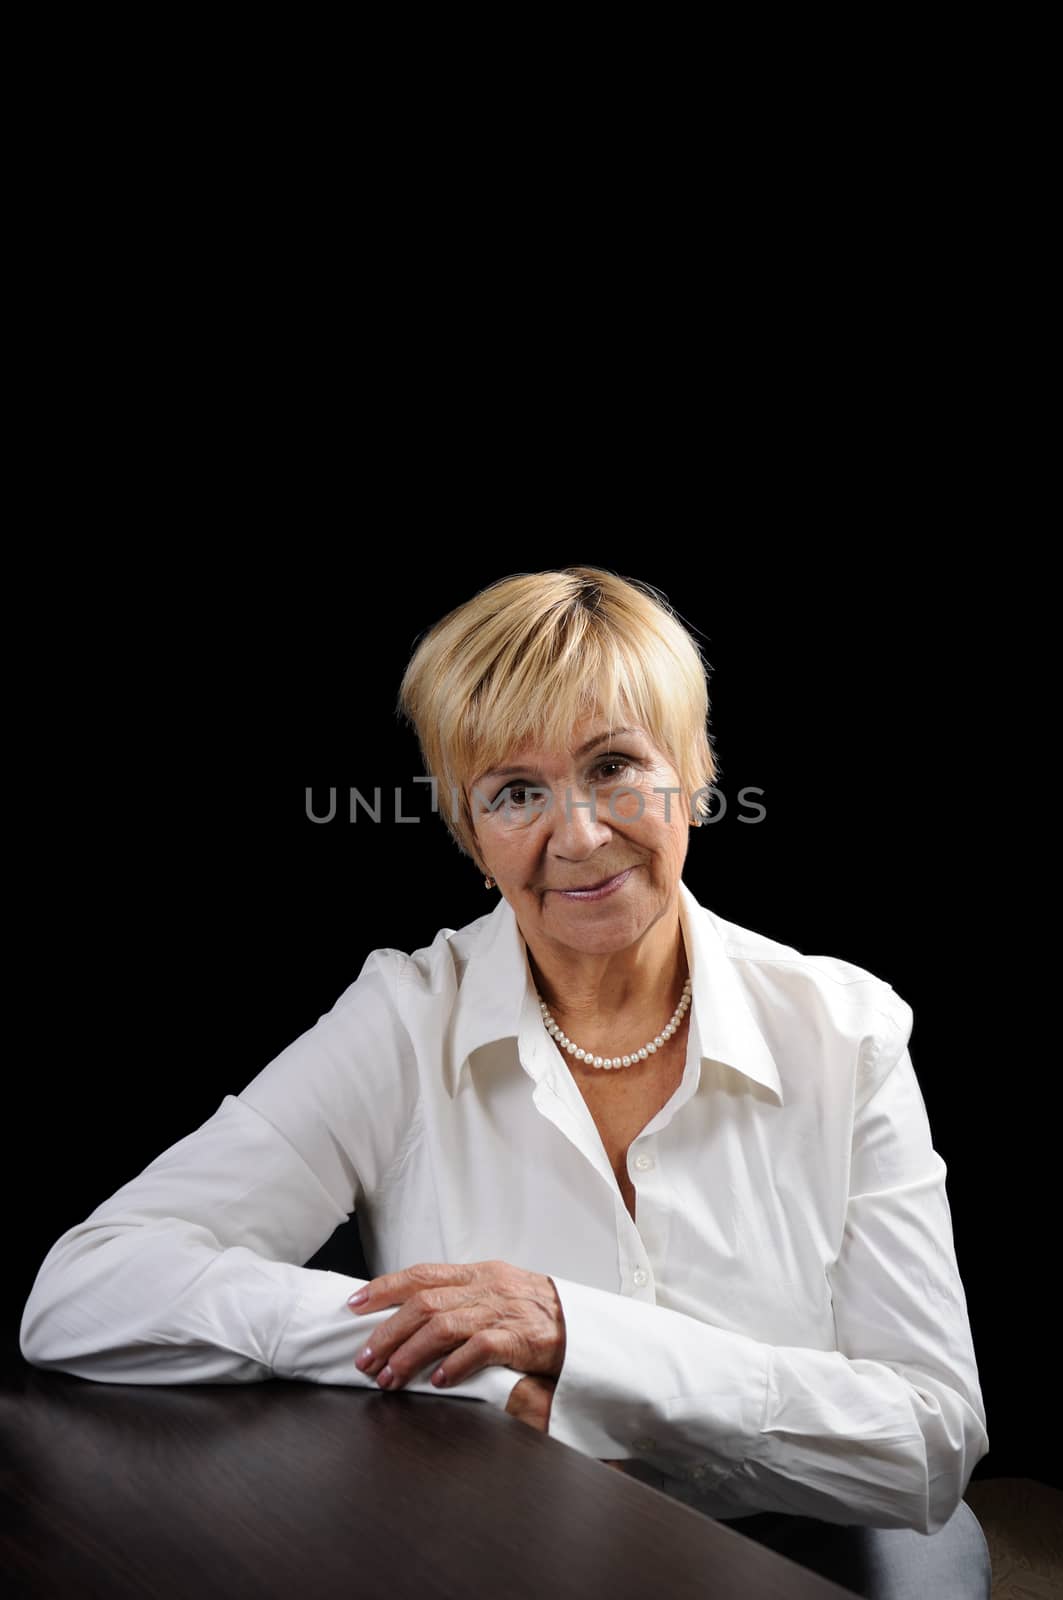 Portrait of an elderly woman (70+) in a business suit against a dark background 